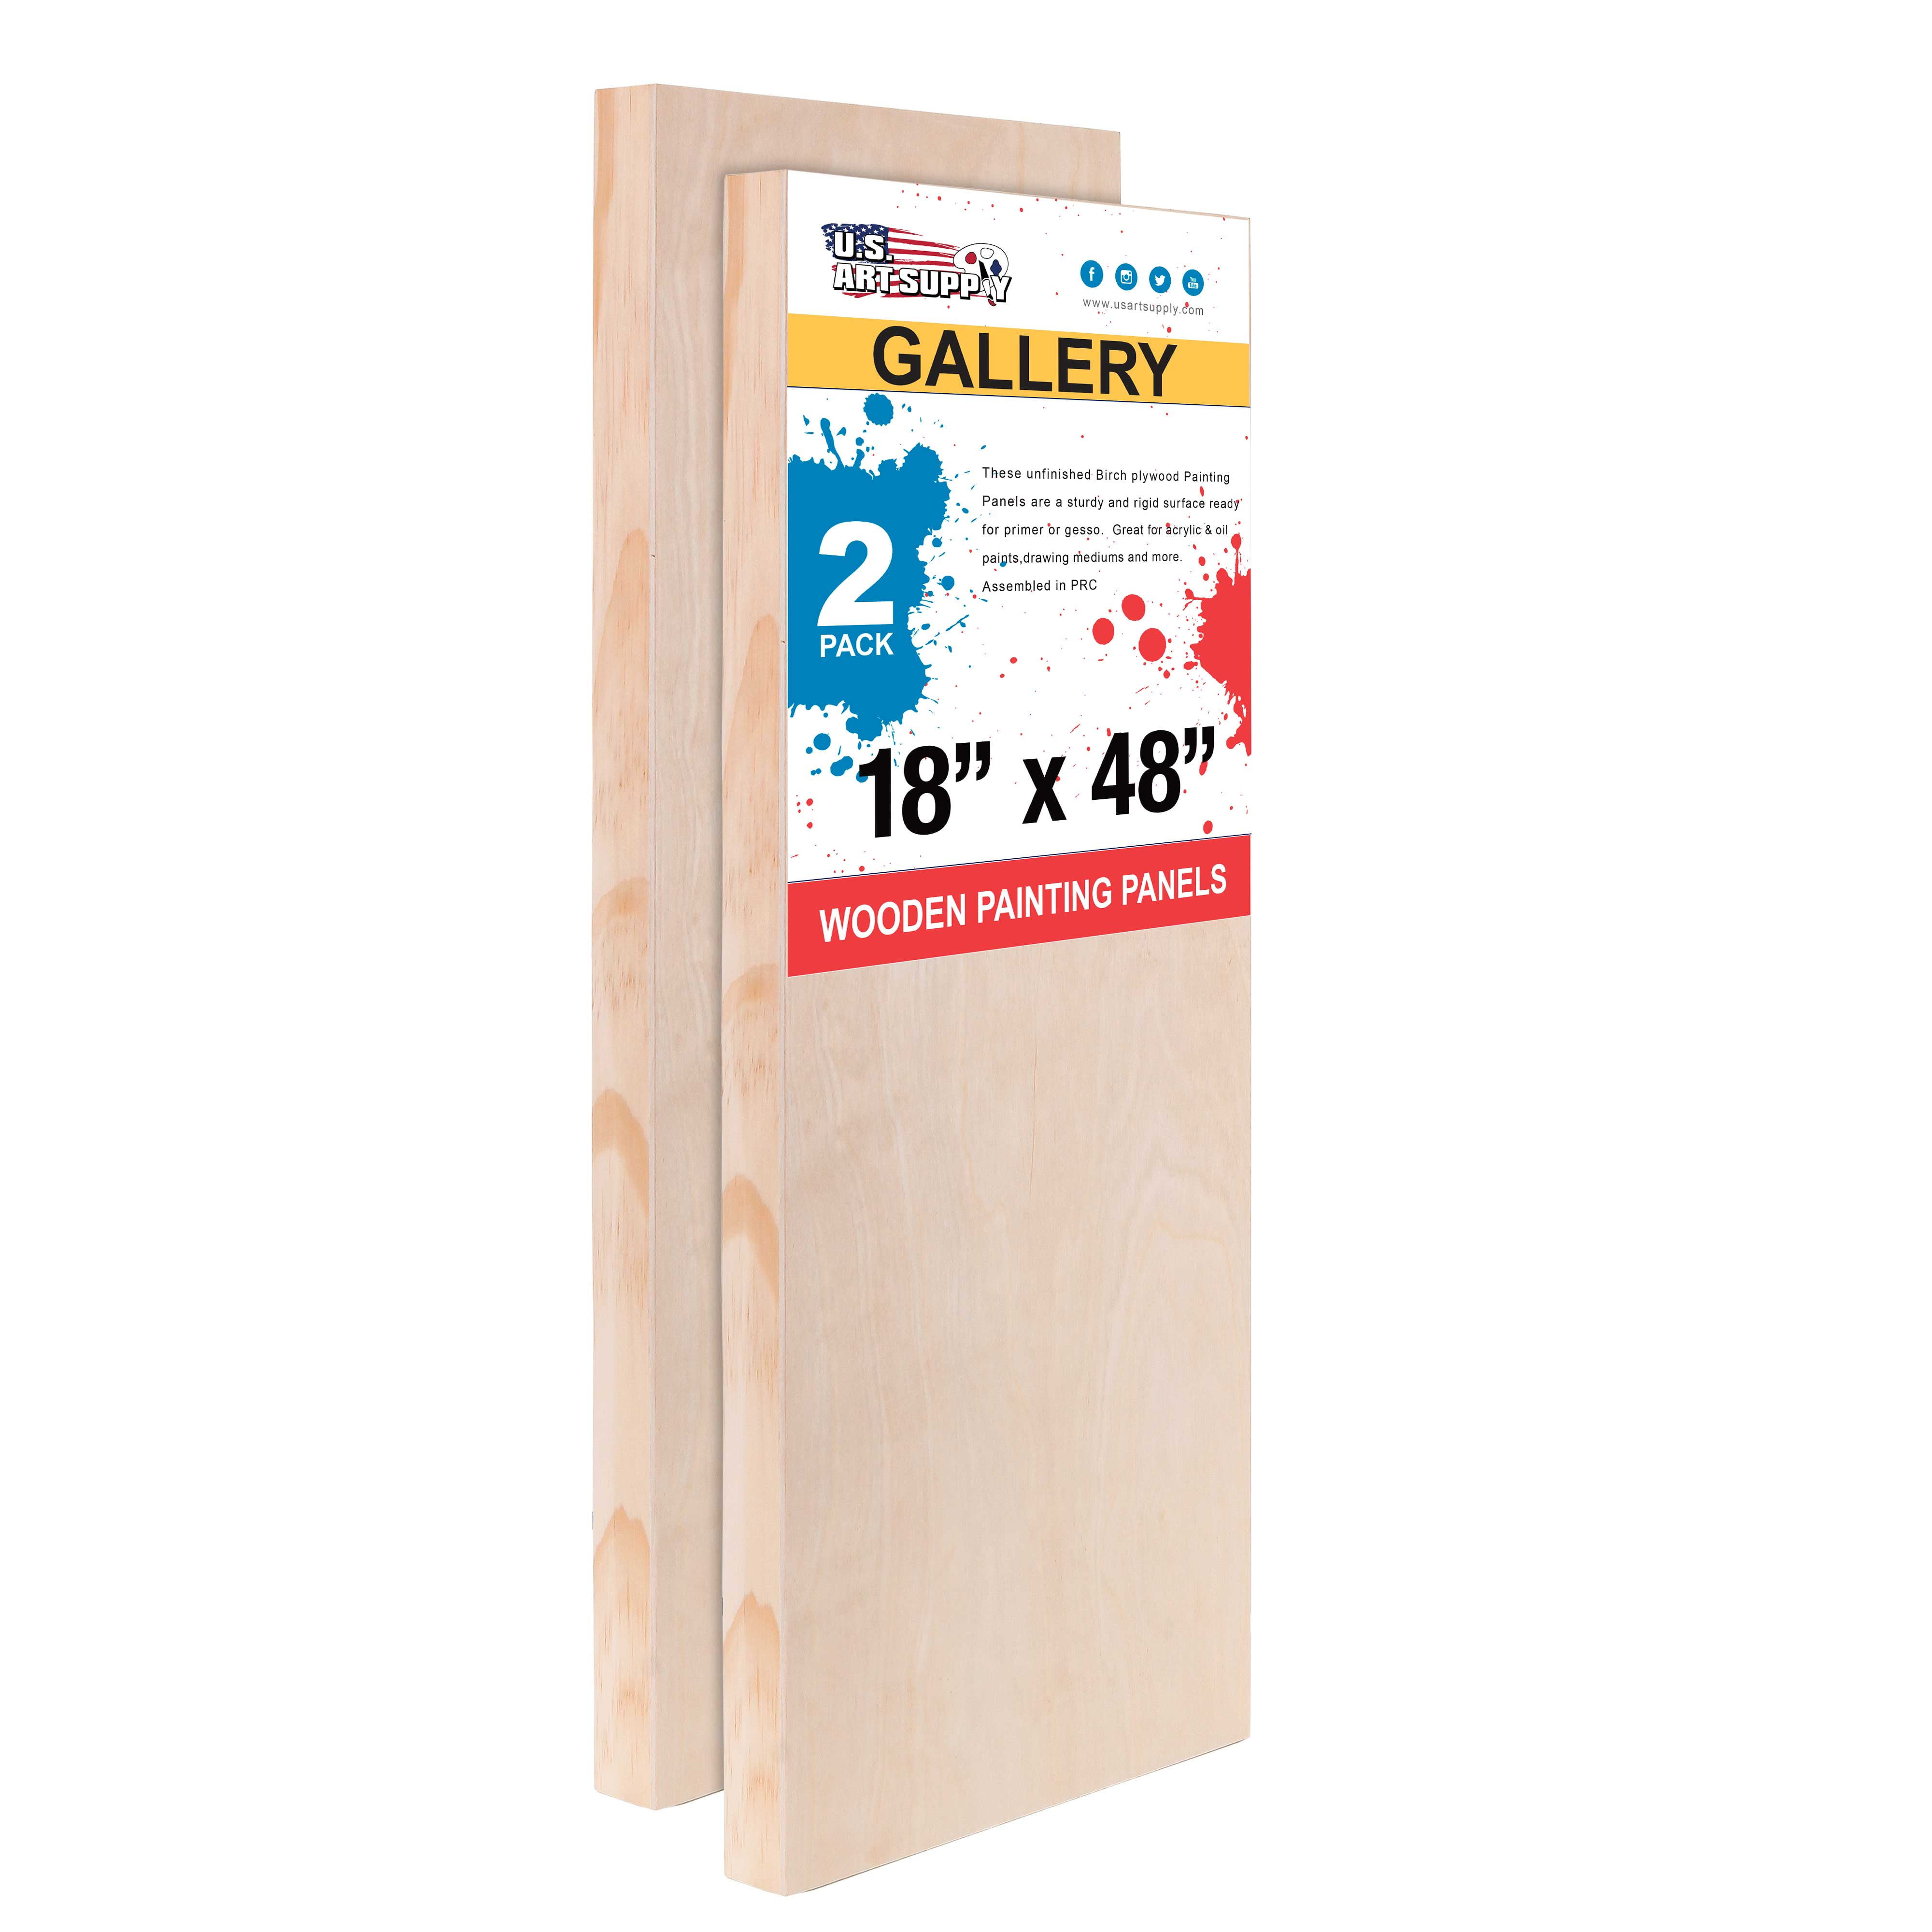 Gallery 1-1/2 Deep Cradle Painting Mixed-Media Craft Acrylic Art Supply 18 x 18 Birch Wood Paint Pouring Panel Boards Oil U.S Encaustic Pack of 2 - Artist Depth Wooden Wall Canvases 